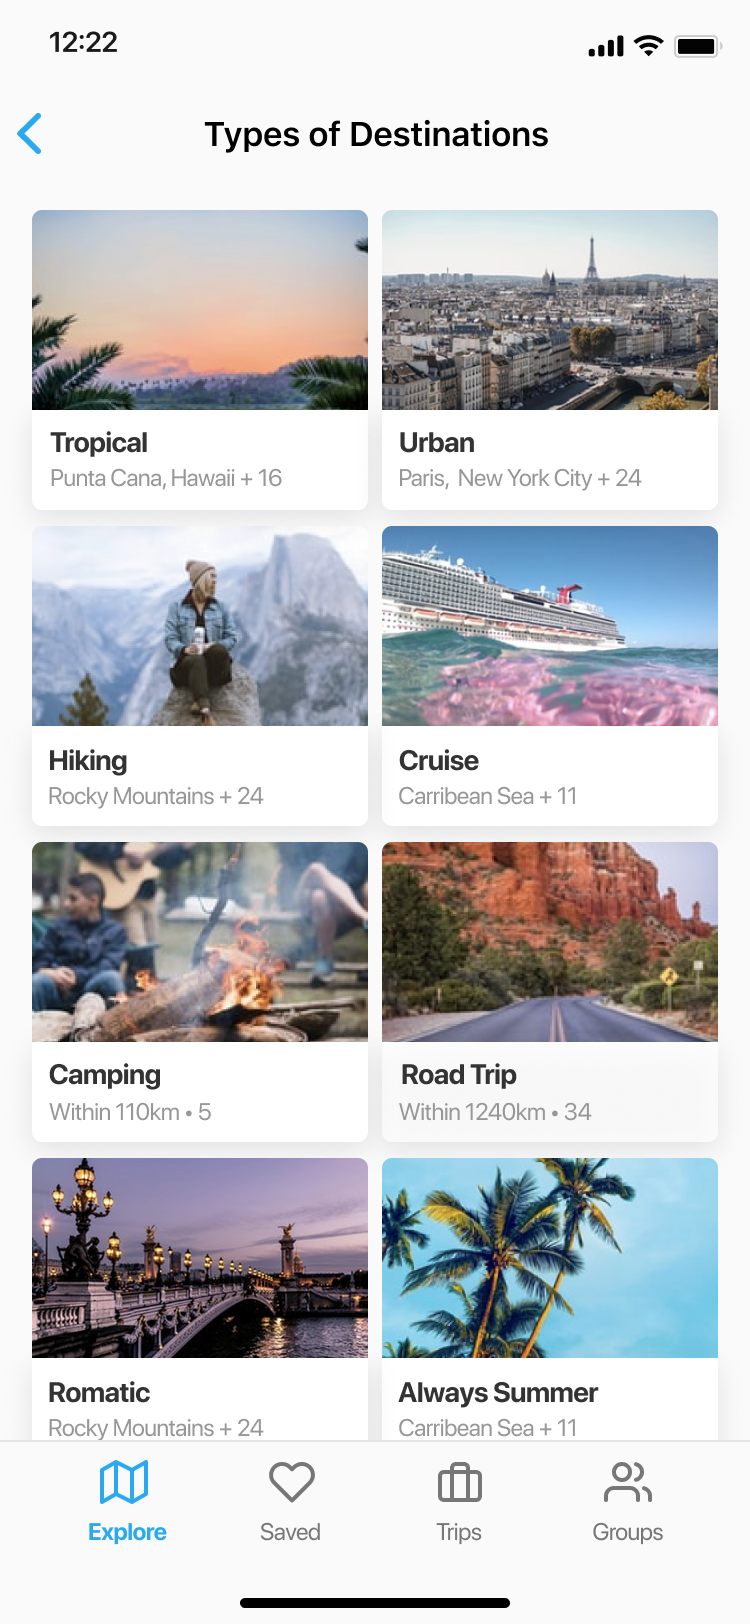 Types of destinations page